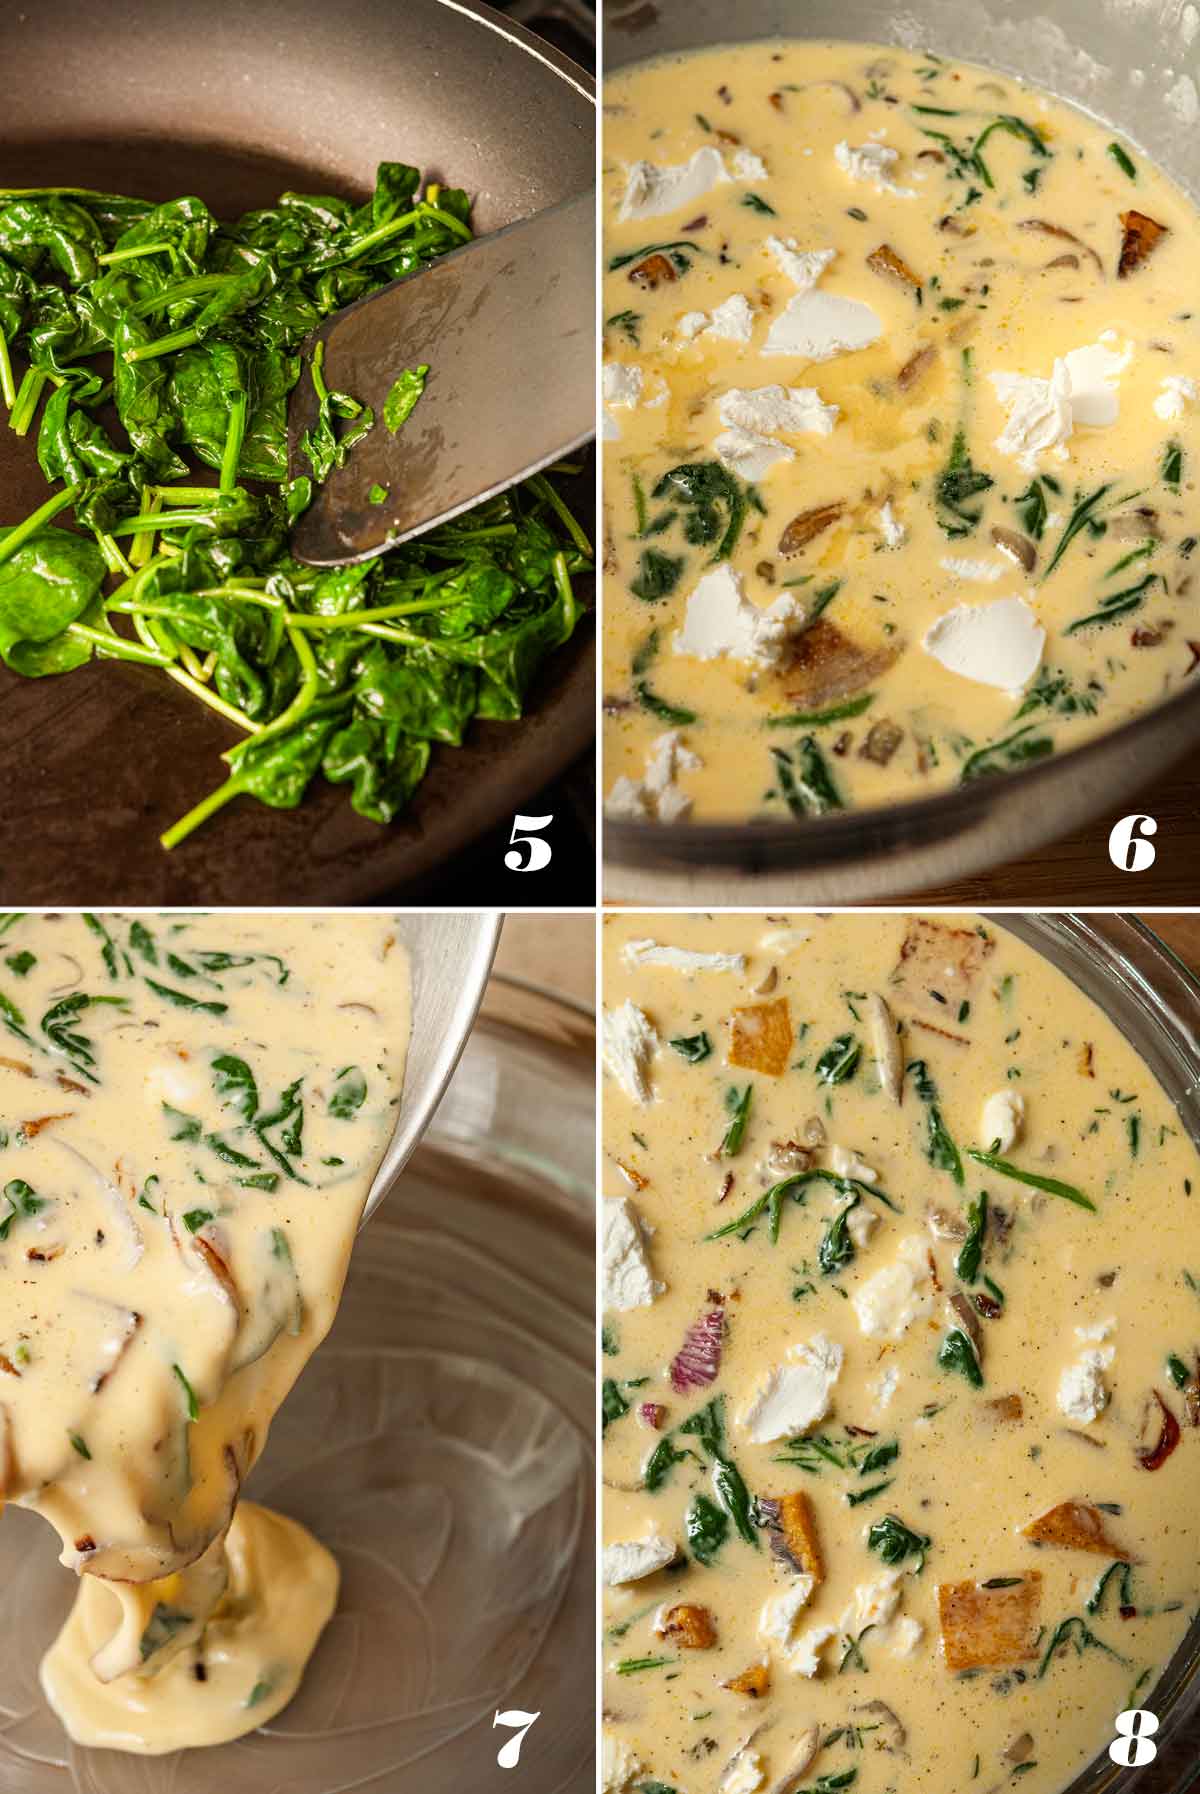 A collage of 4 numbered images showing how to create a butternut squash quiche.